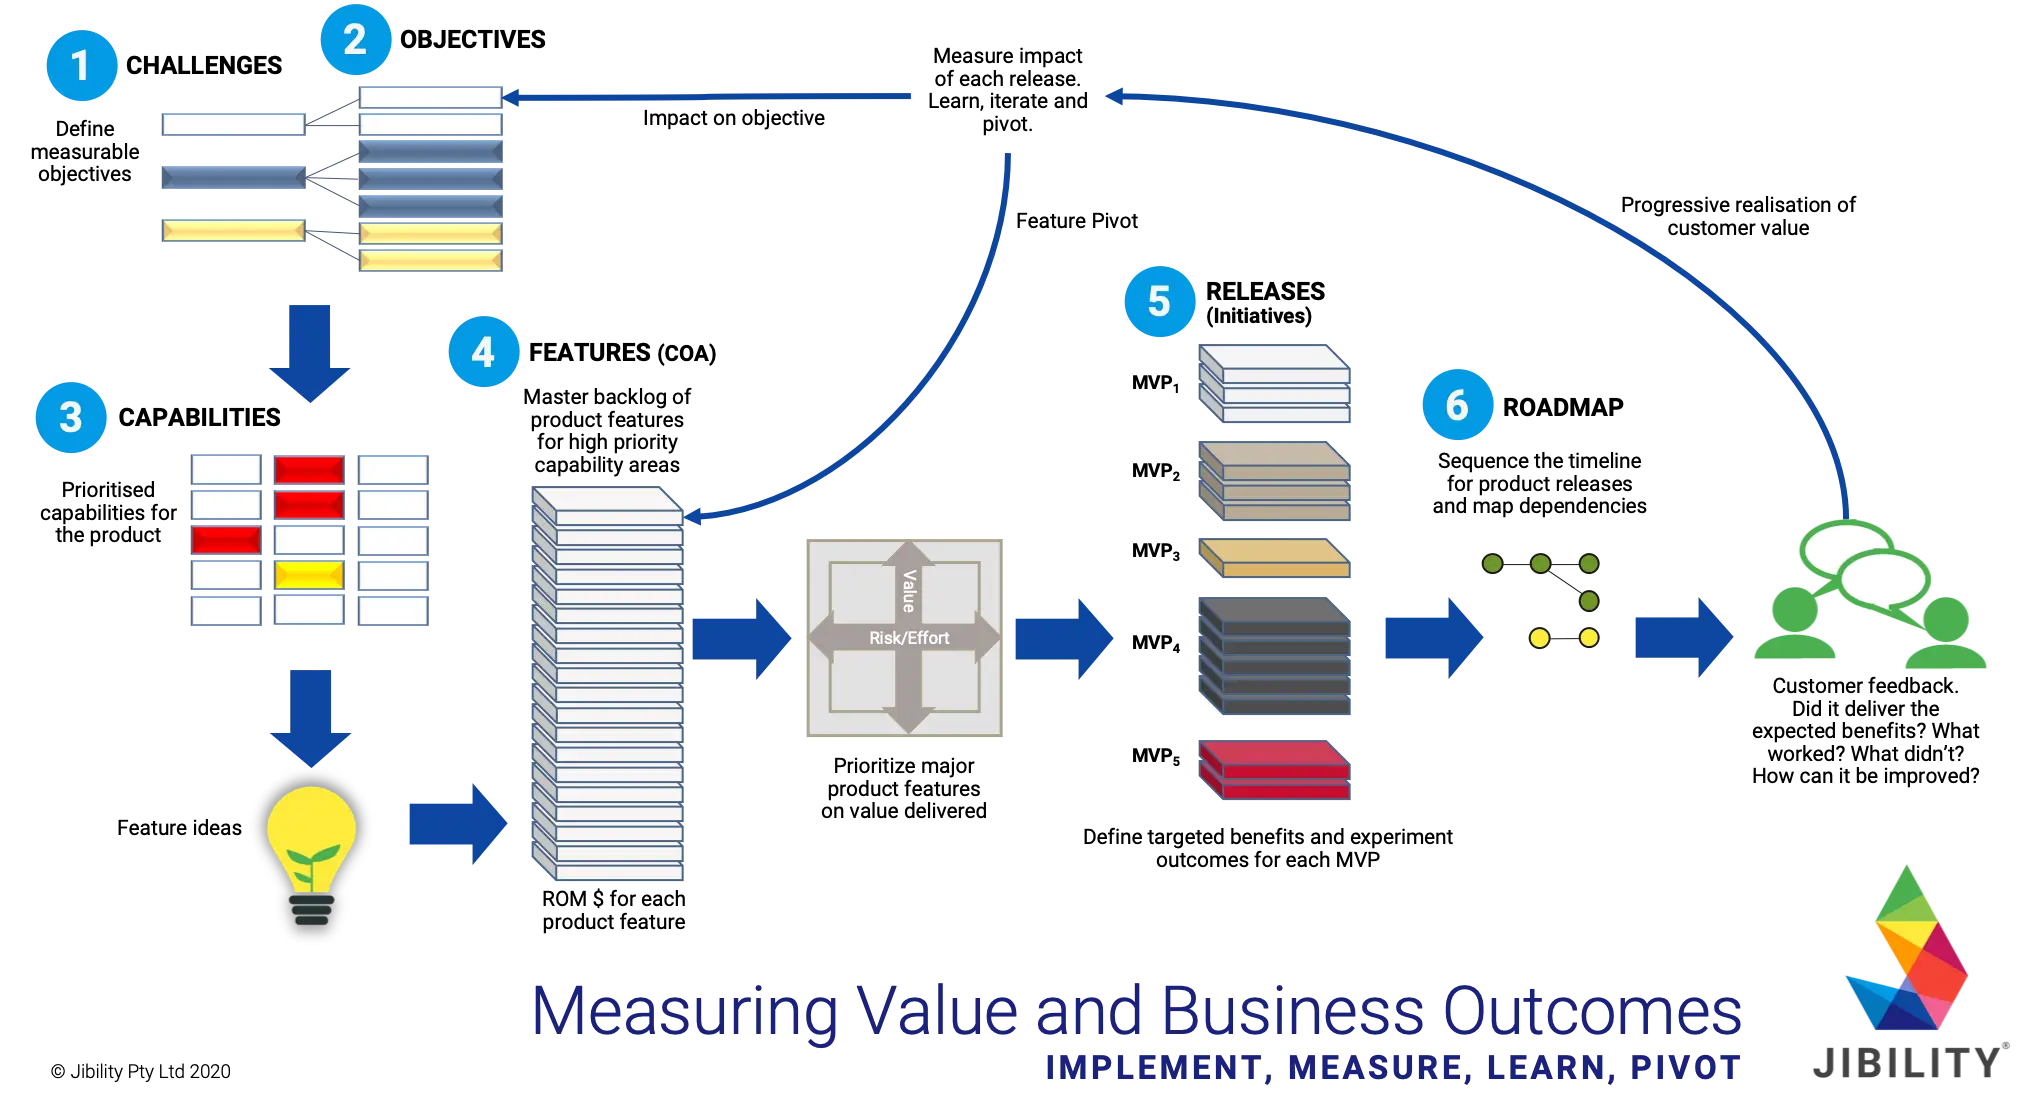 Measuring value and business outcomes